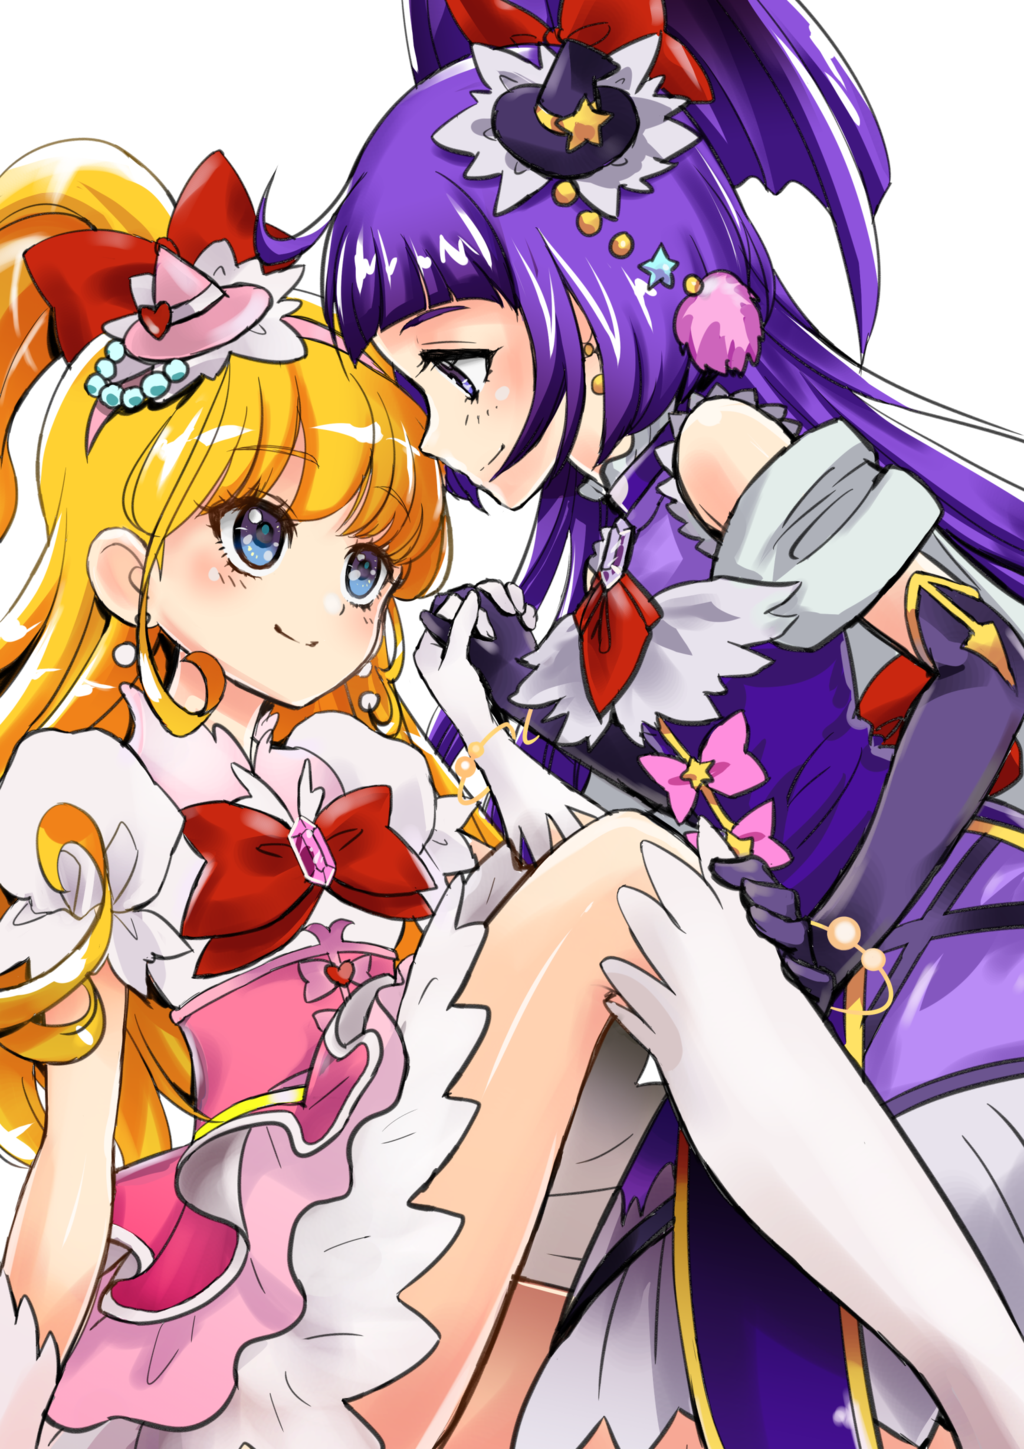 Maho Girls PreCure! Backgrounds, Compatible - PC, Mobile, Gadgets| 1024x1449 px